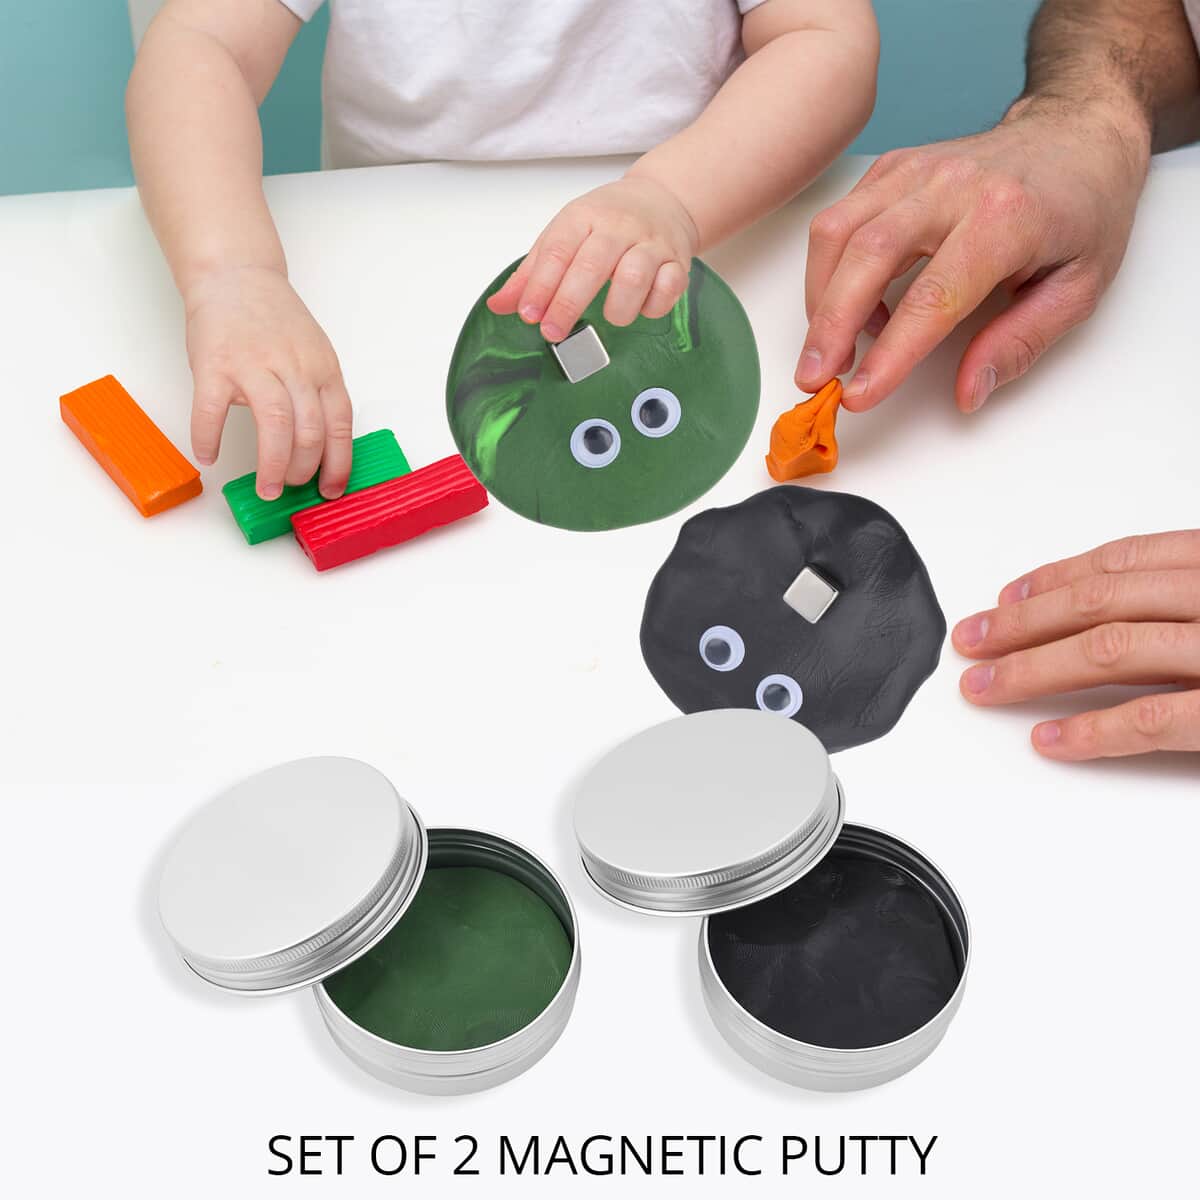 Set of 2 Black and Green Magnetic Putty (2.56"x2.56") image number 1